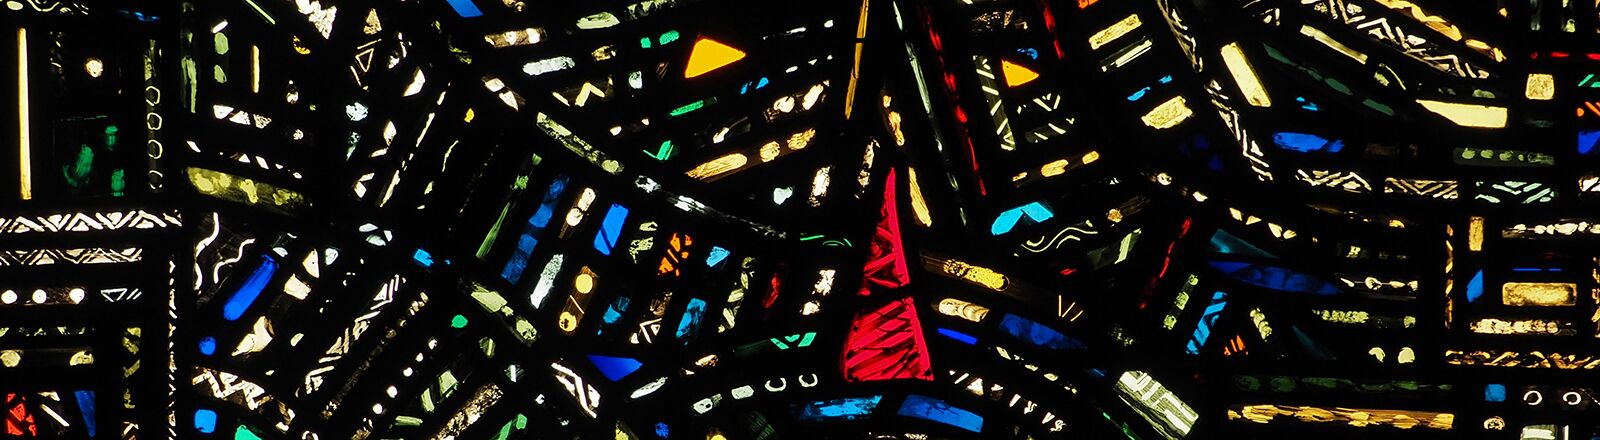 Materials, Part 3 - Challenges and Lessons Learned in Stained Glass Conservation